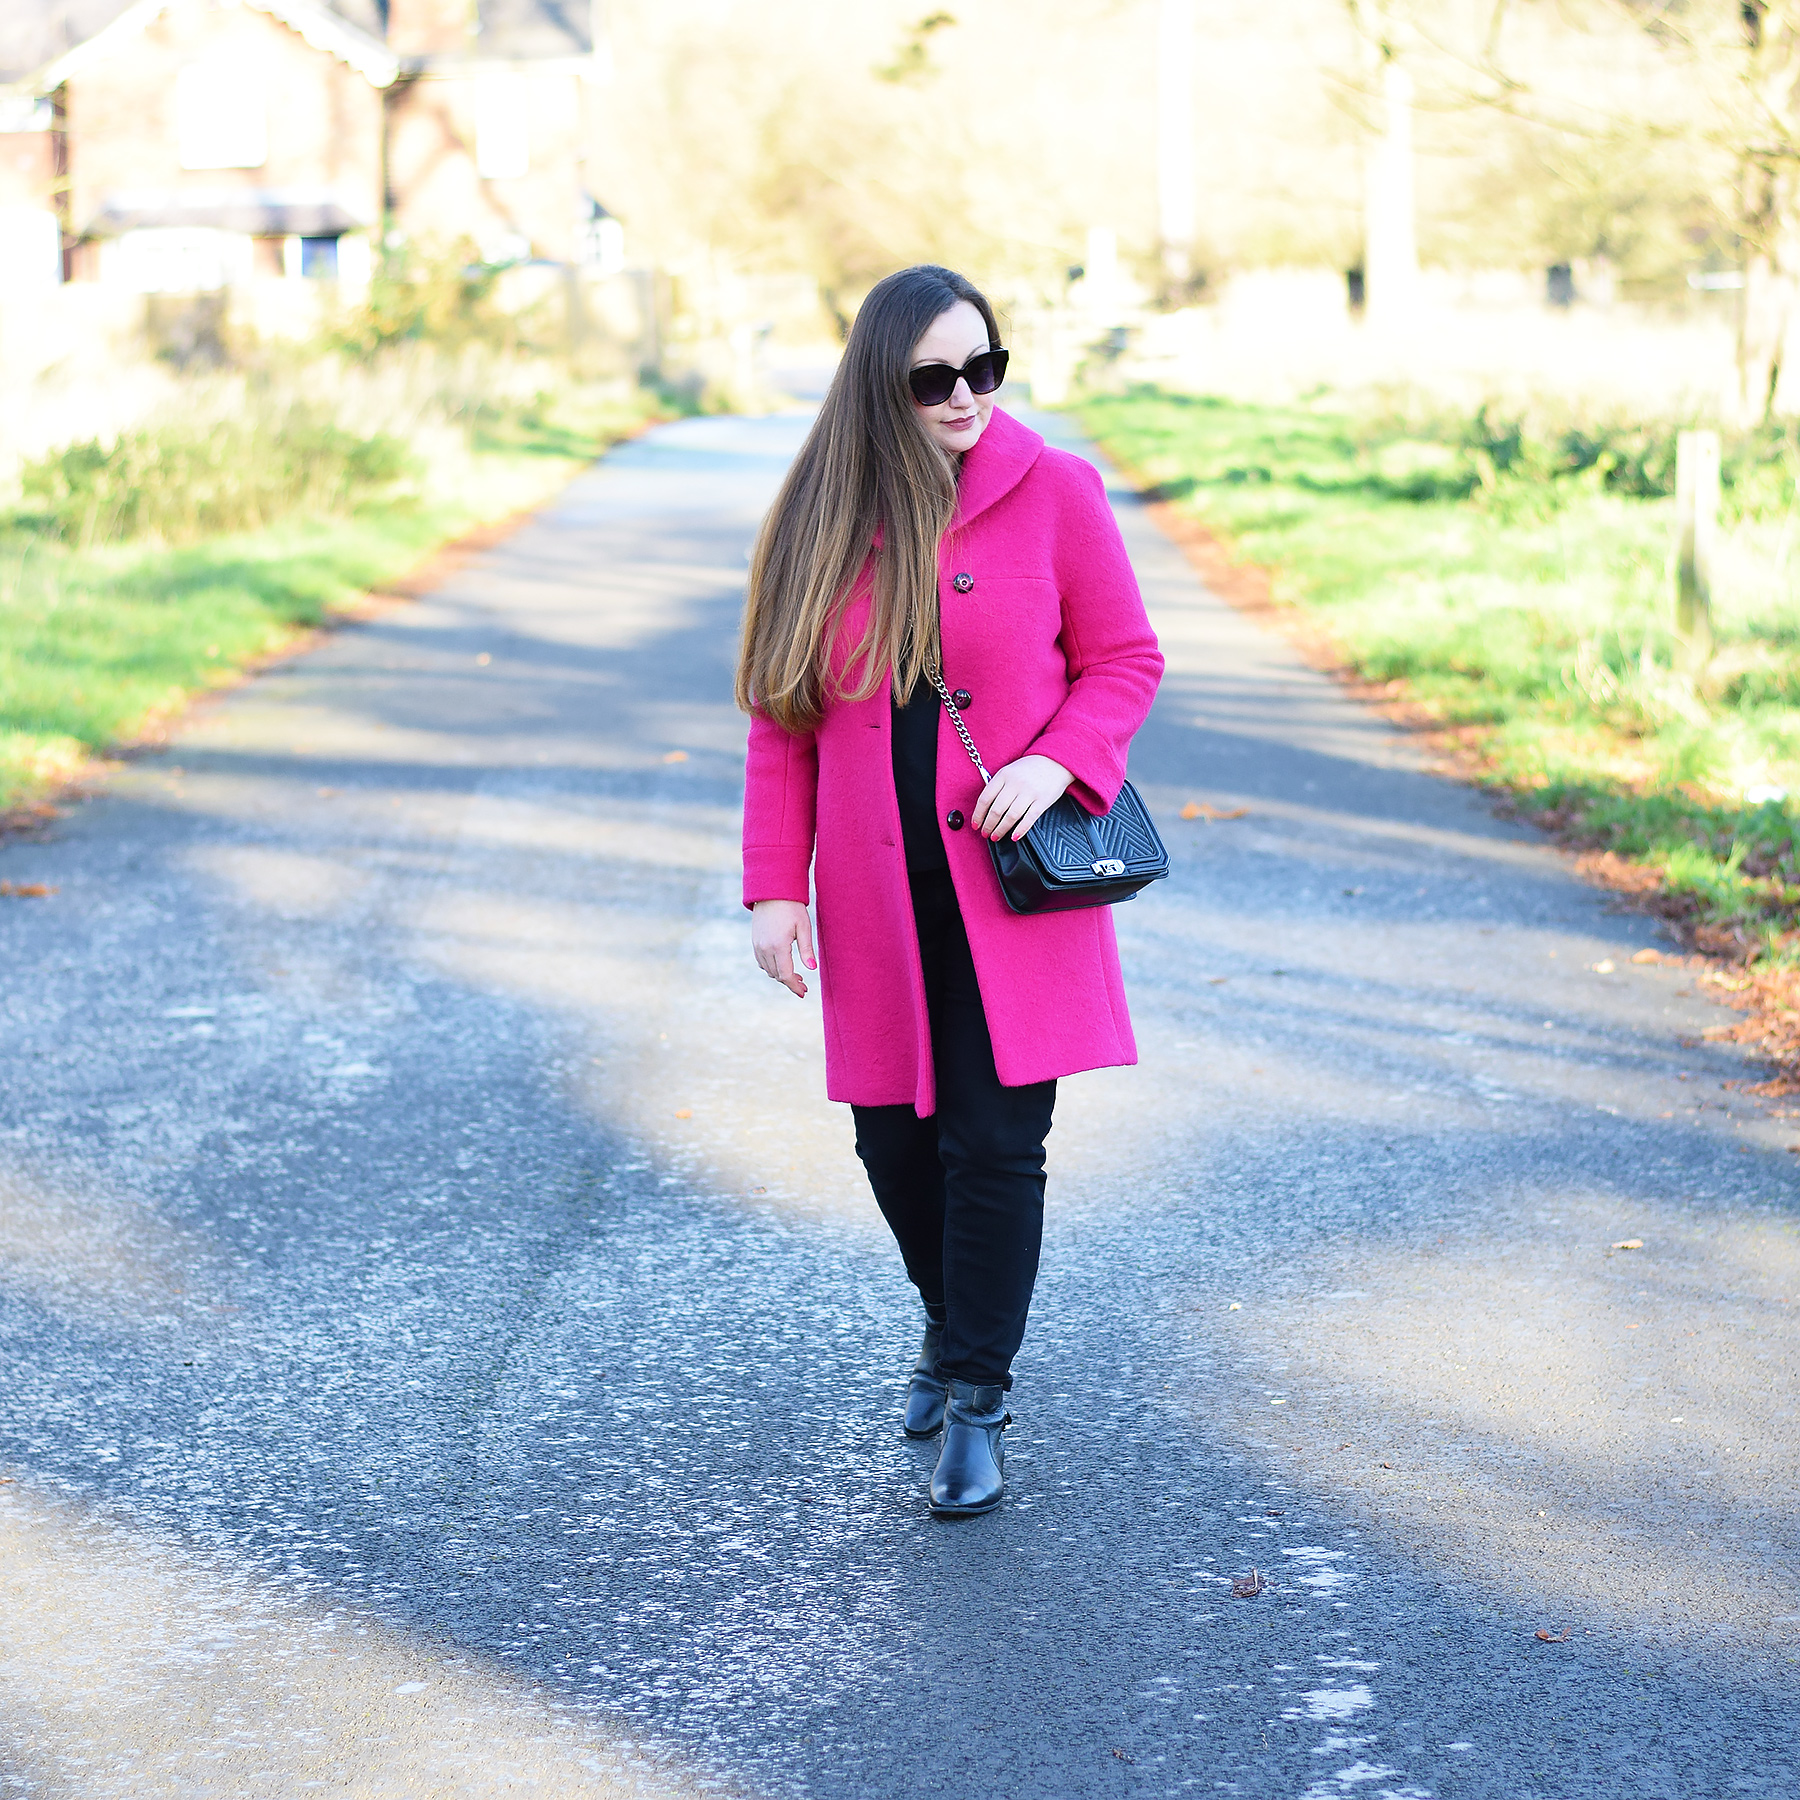 How to wear a hot pink coat